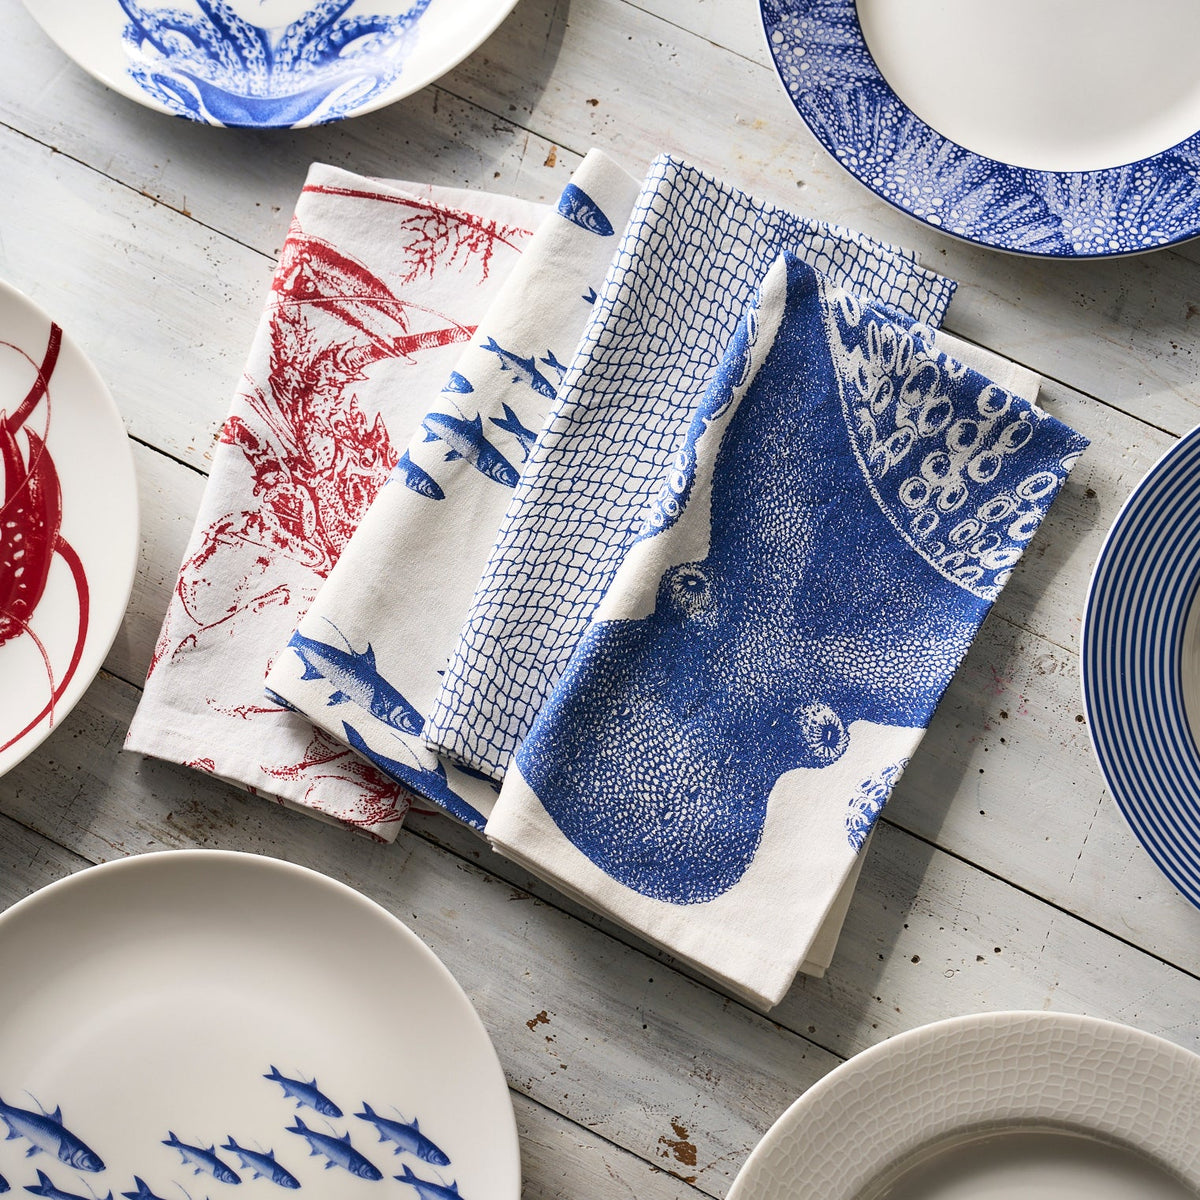 Various blue and white patterned plates and folded tea towels are arranged on a wooden surface. The blue and white Lucy Dinner Napkins, Set of 4 by Caskata feature different marine-themed designs, perfect for any coastal-inspired setting.